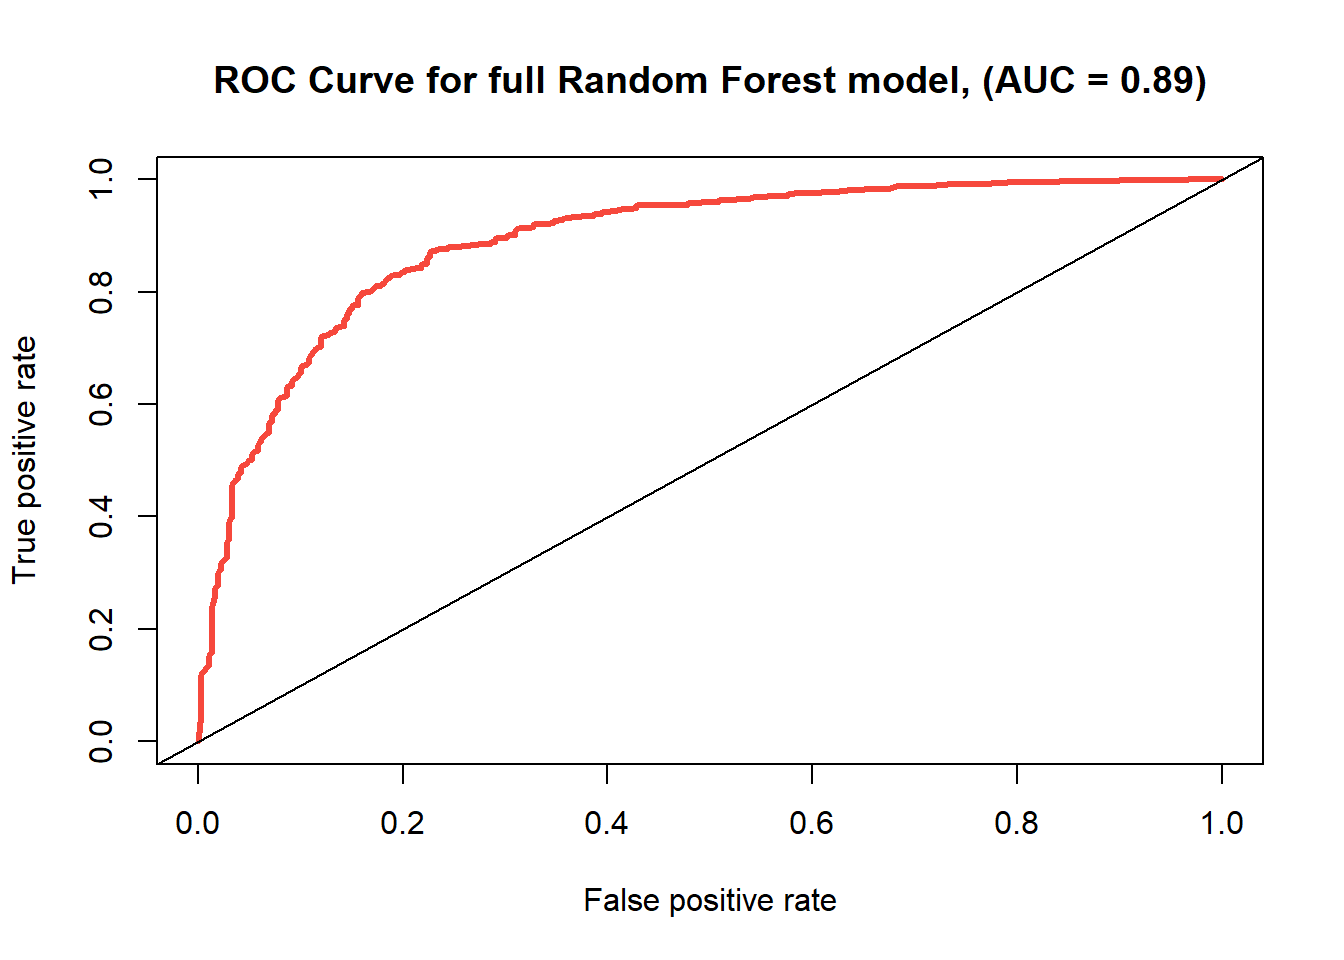 ROC Curve for full random forest with 8 variables.